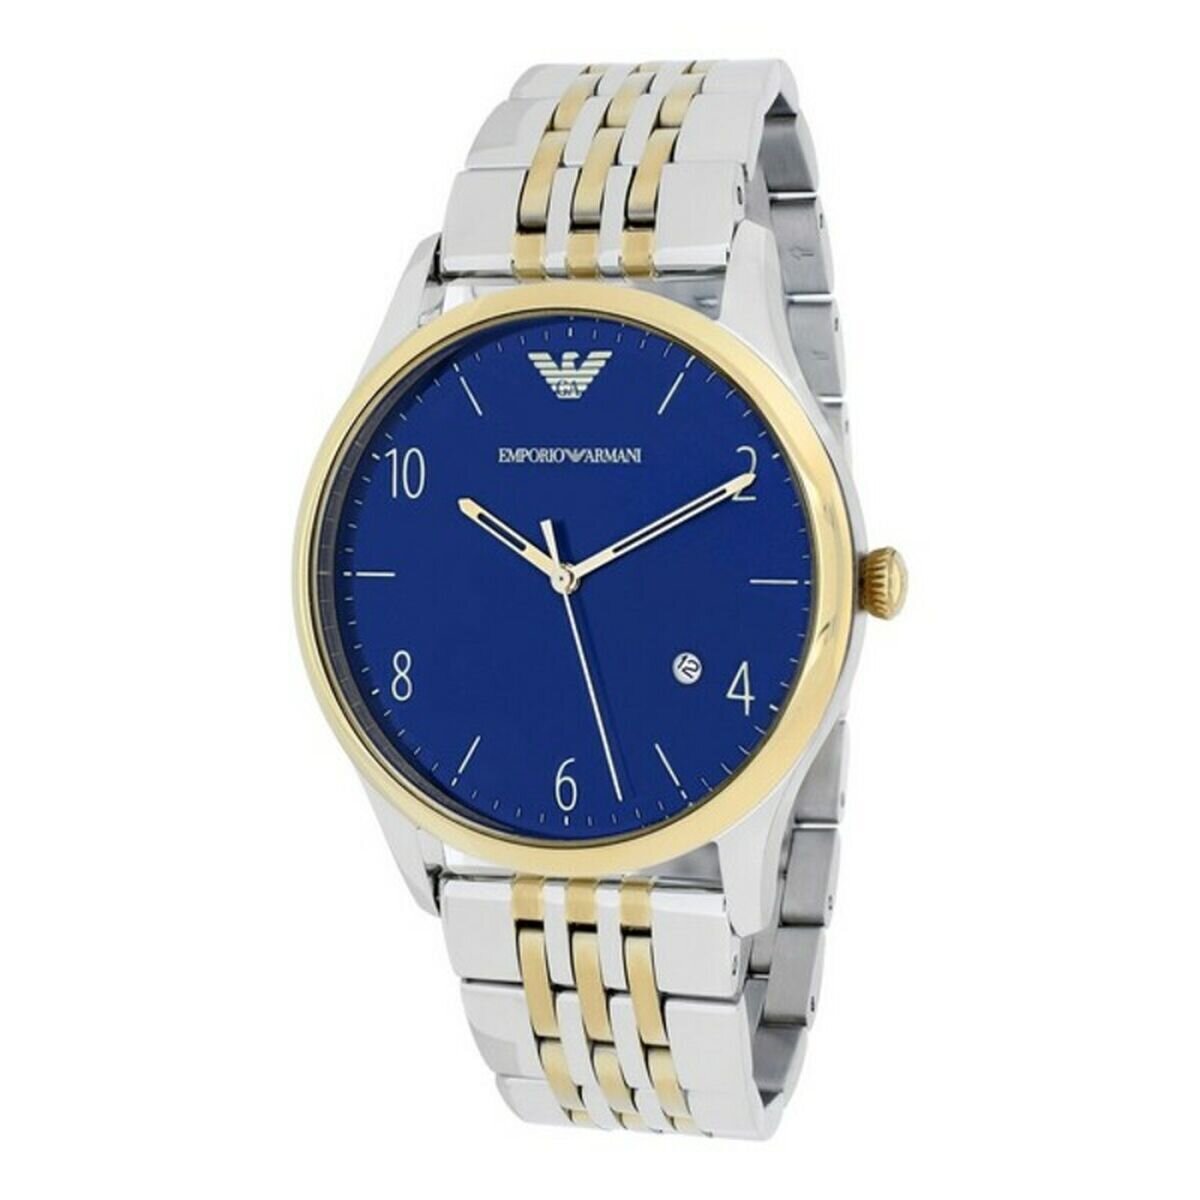 Men's Gold and Silver Two Tone Armani Watch